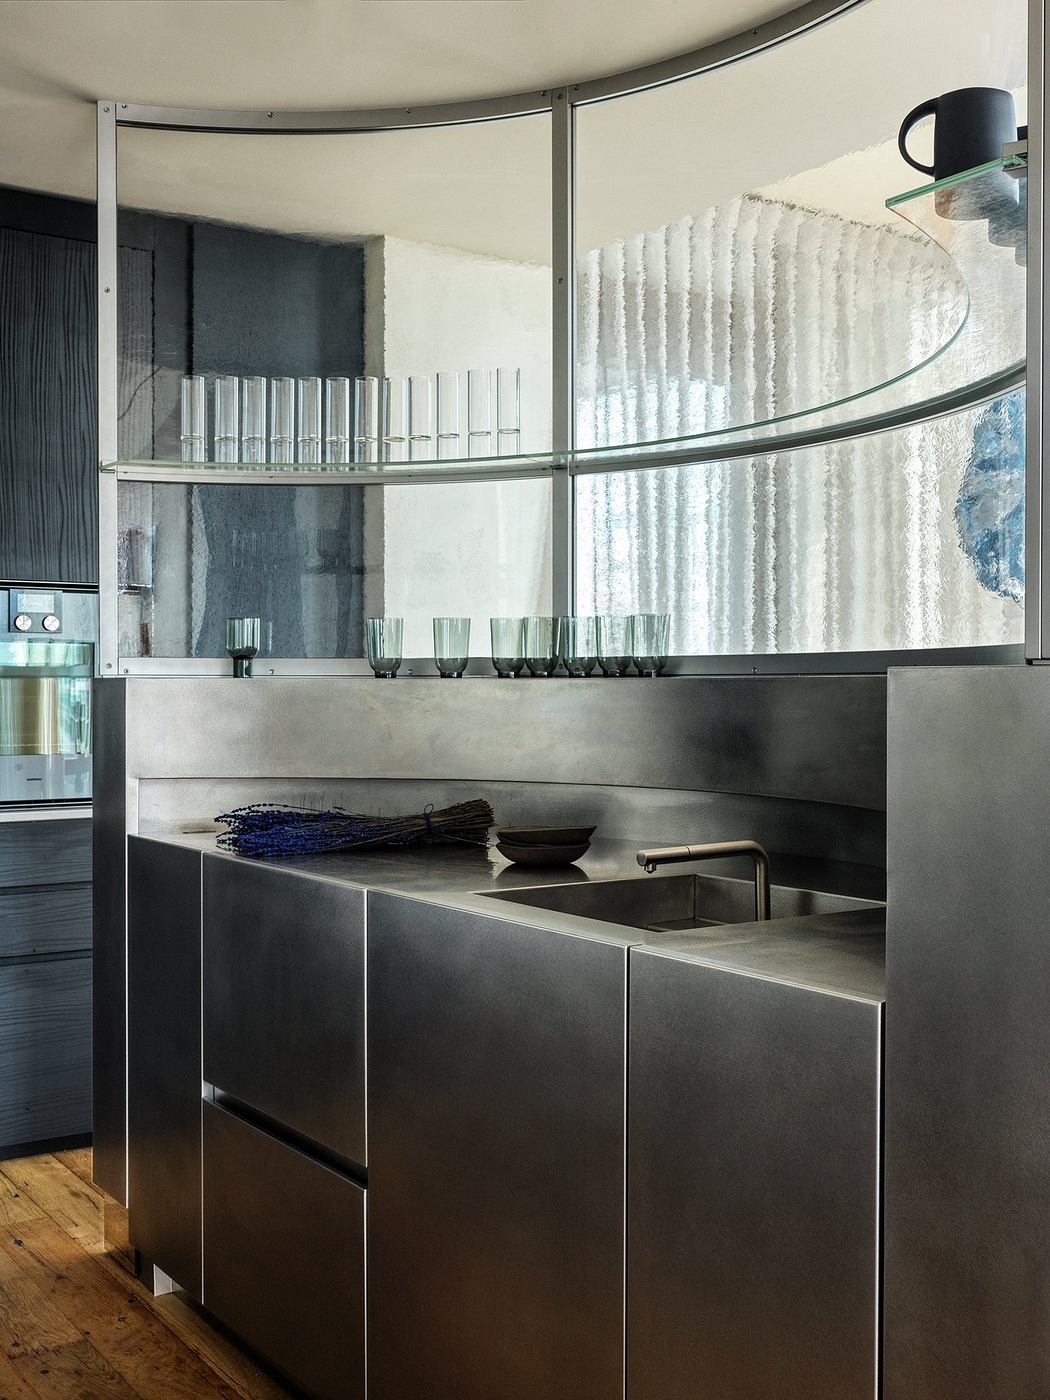 Contemporary kitchen with stainless steel cabinets and curved glass shelving.